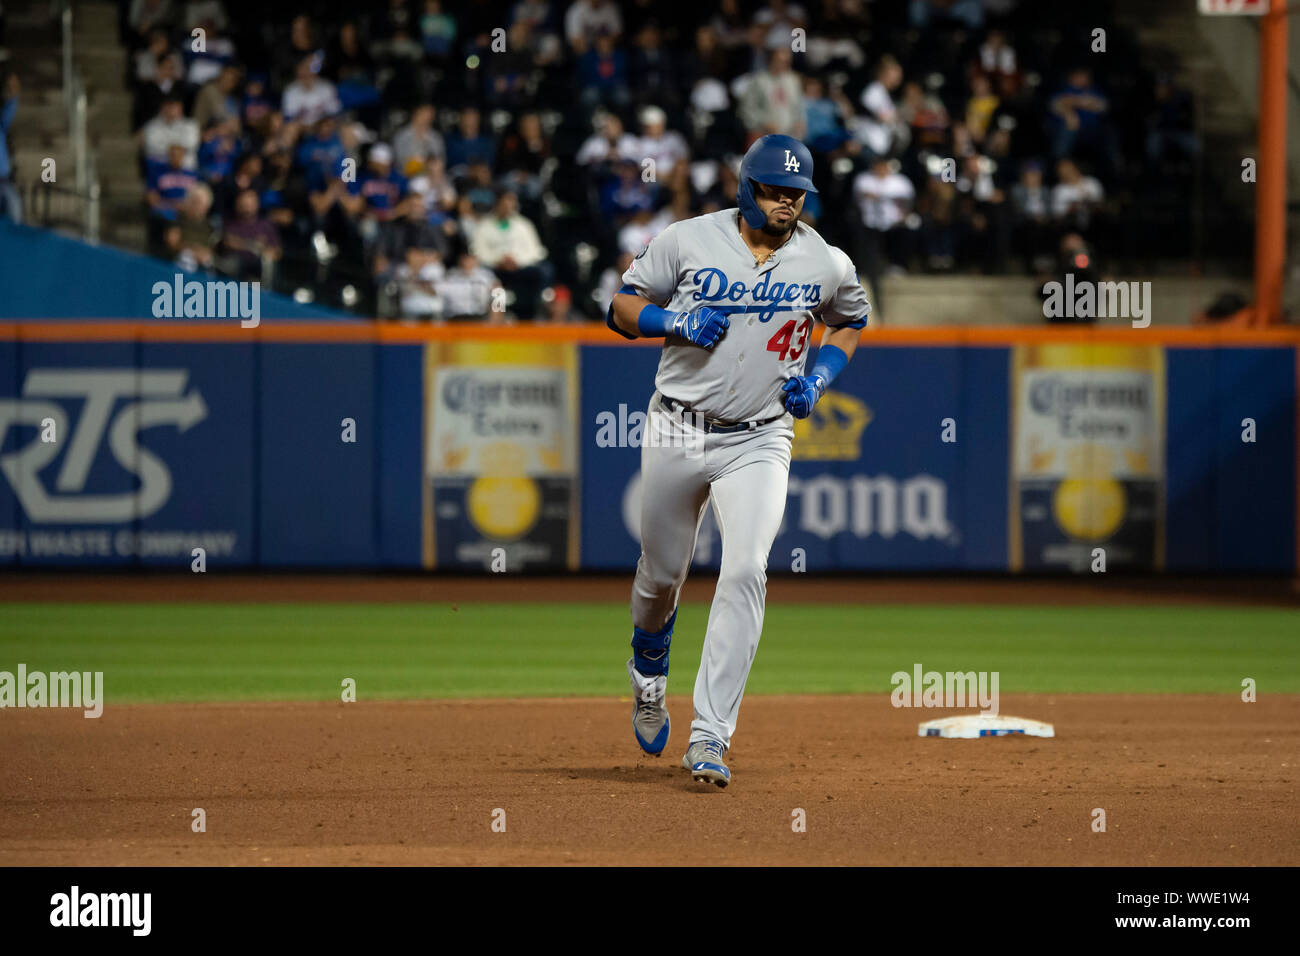 Queens, New York, USA. 13th Sep, 2019. Los Angeles Dodgers third baseman Edwin Rios (43) runs the bases after a home run during the game between The New York Mets and The Los Angeles Dodgers at Citi Field in Queens, New York. Mandatory credit: Kostas Lymperopoulos/CSM/Alamy Live News Stock Photo